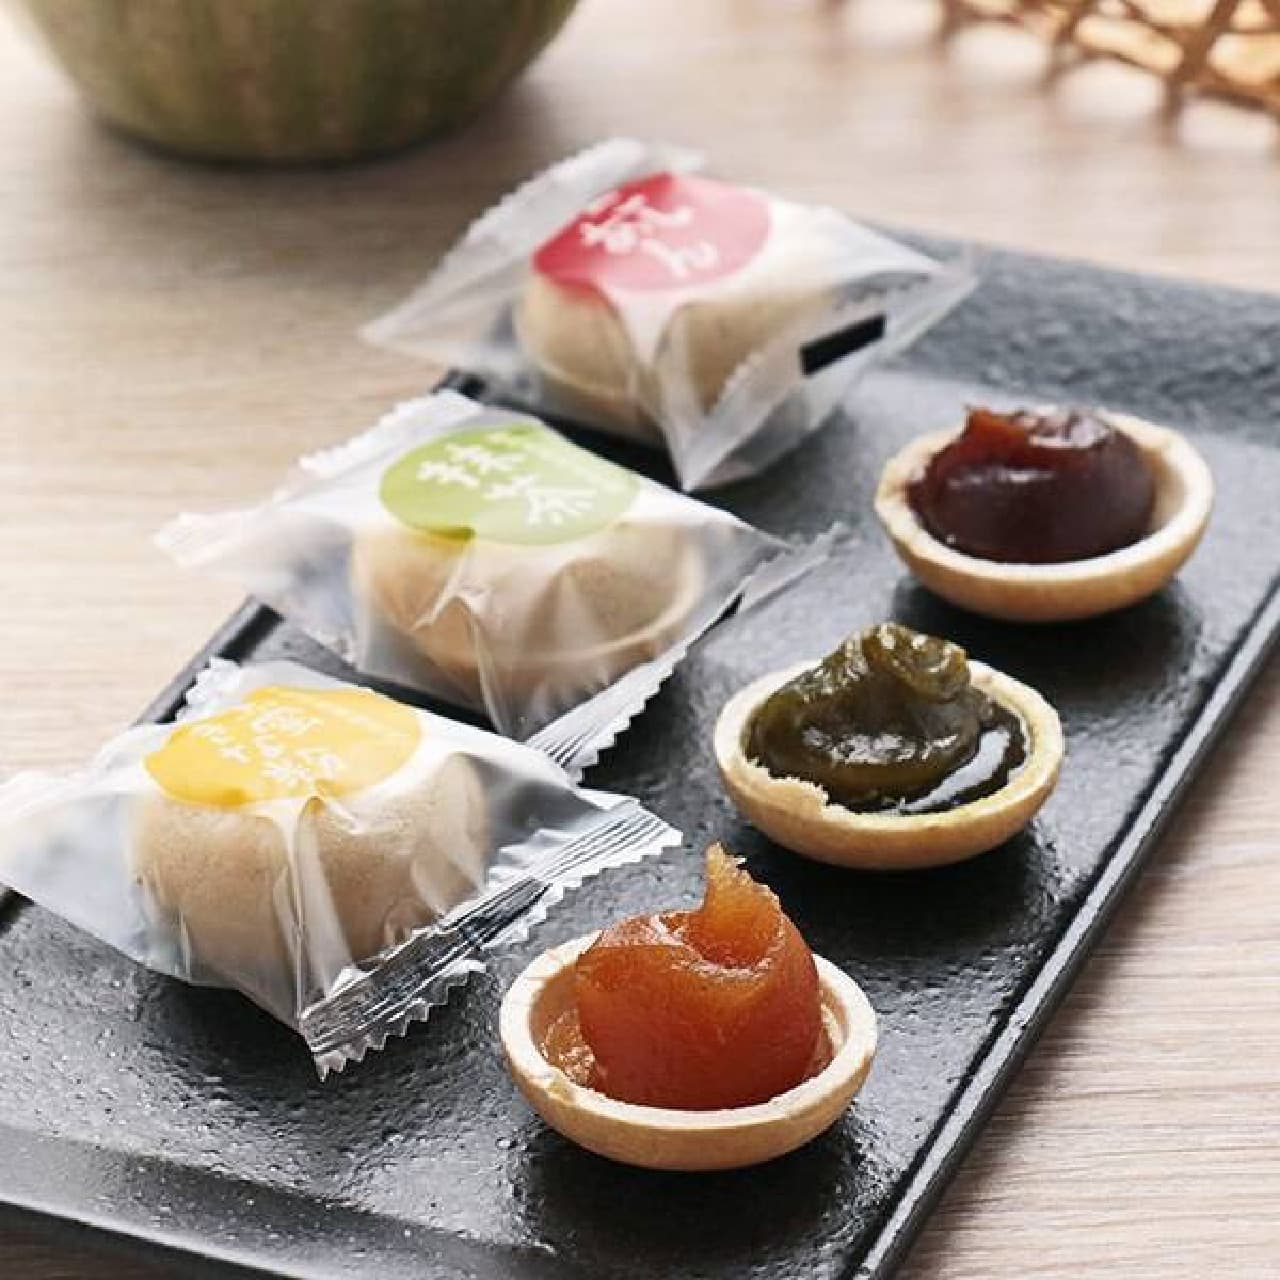 A special feature on Japanese sweets available at KALDI (KALDI)!